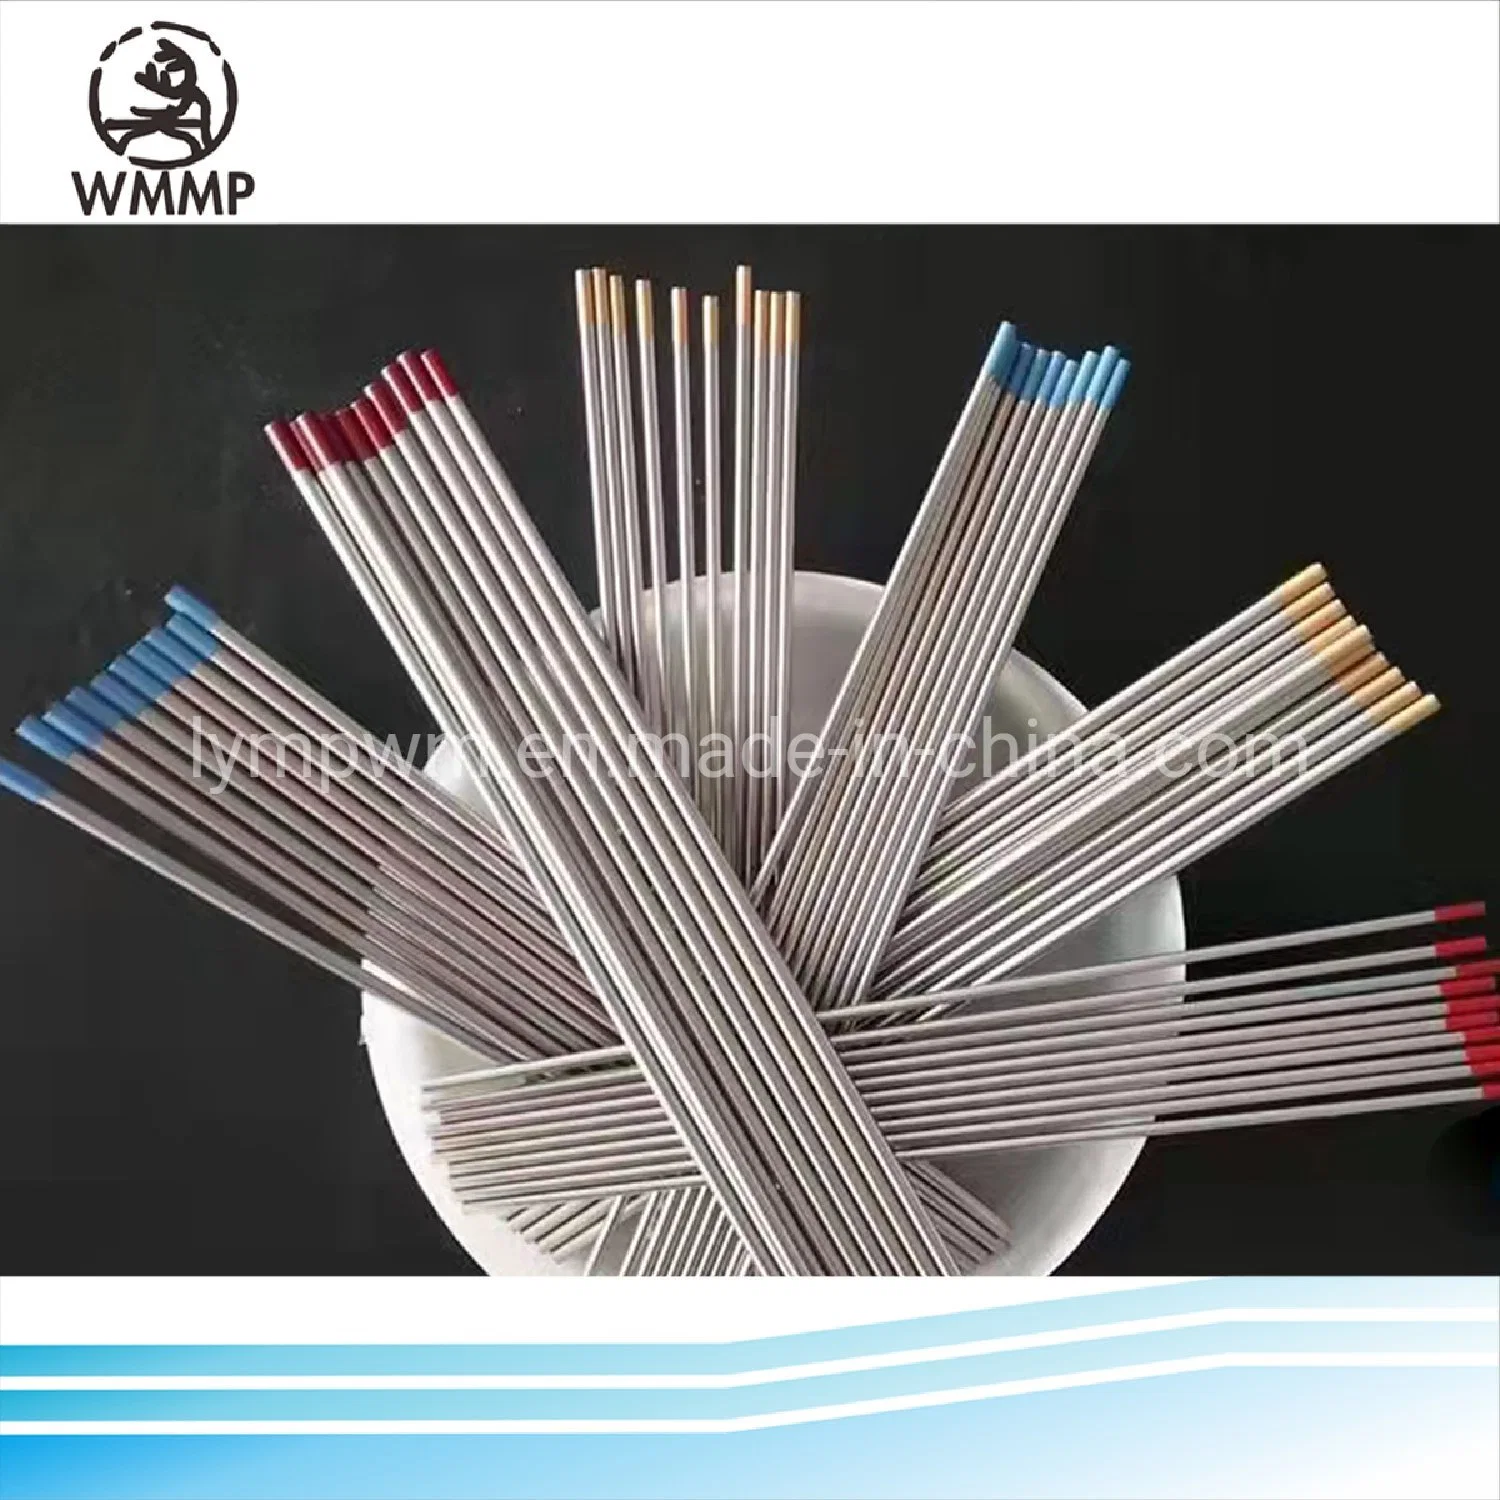 High quality/High cost performance Tungsten Electrodes Wl20&Wl15 Lanthanum Tungsten Electrodes